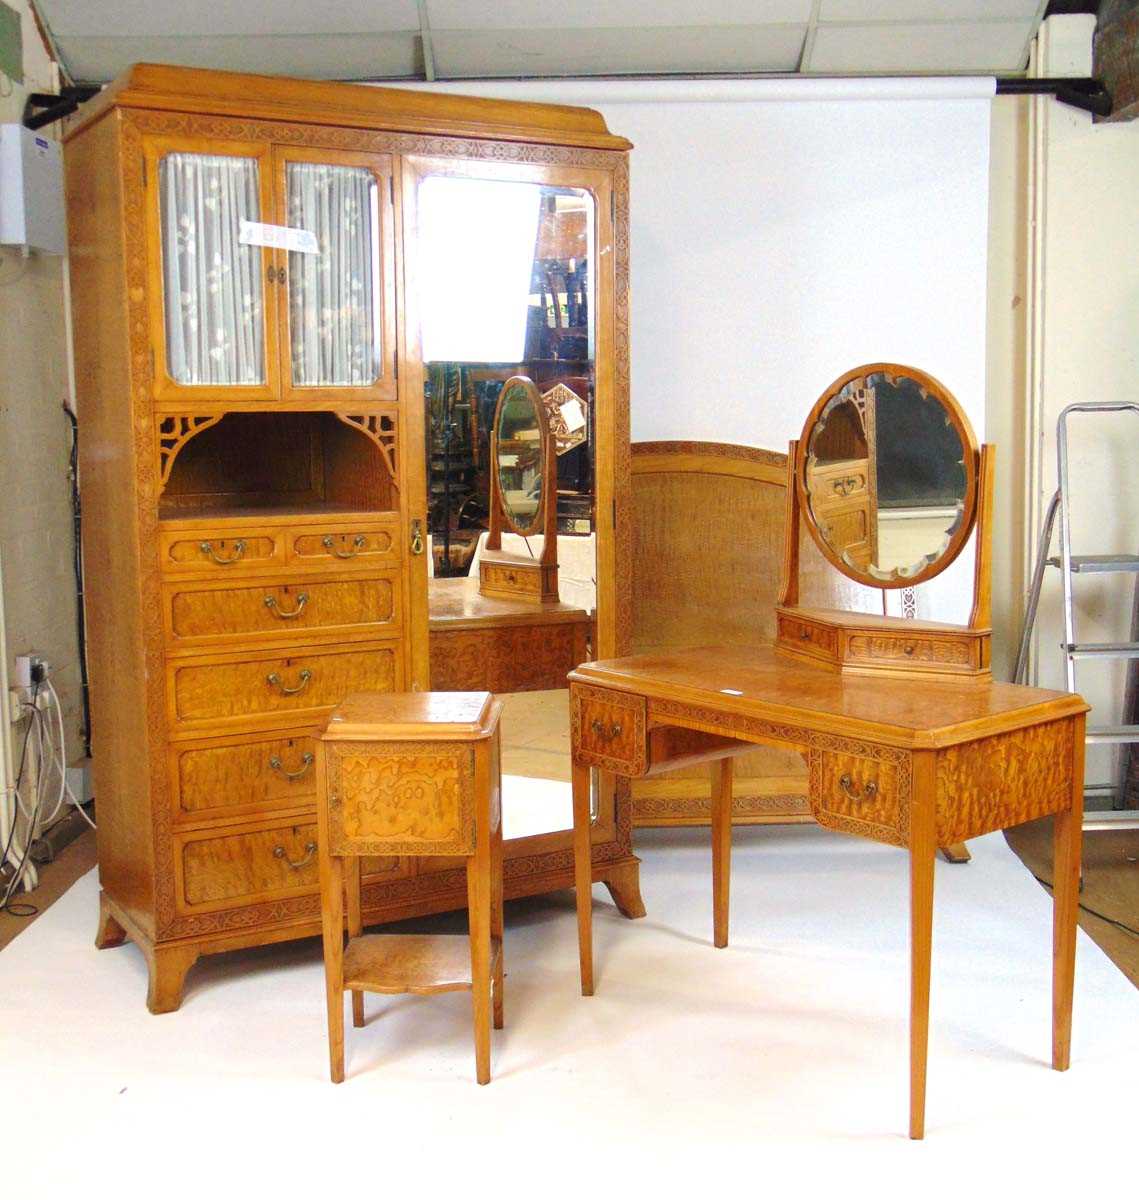 An early 20th century Hungarian/curly ash bedroom suite by Waring and Gillow (Paris) Ltd. comprising